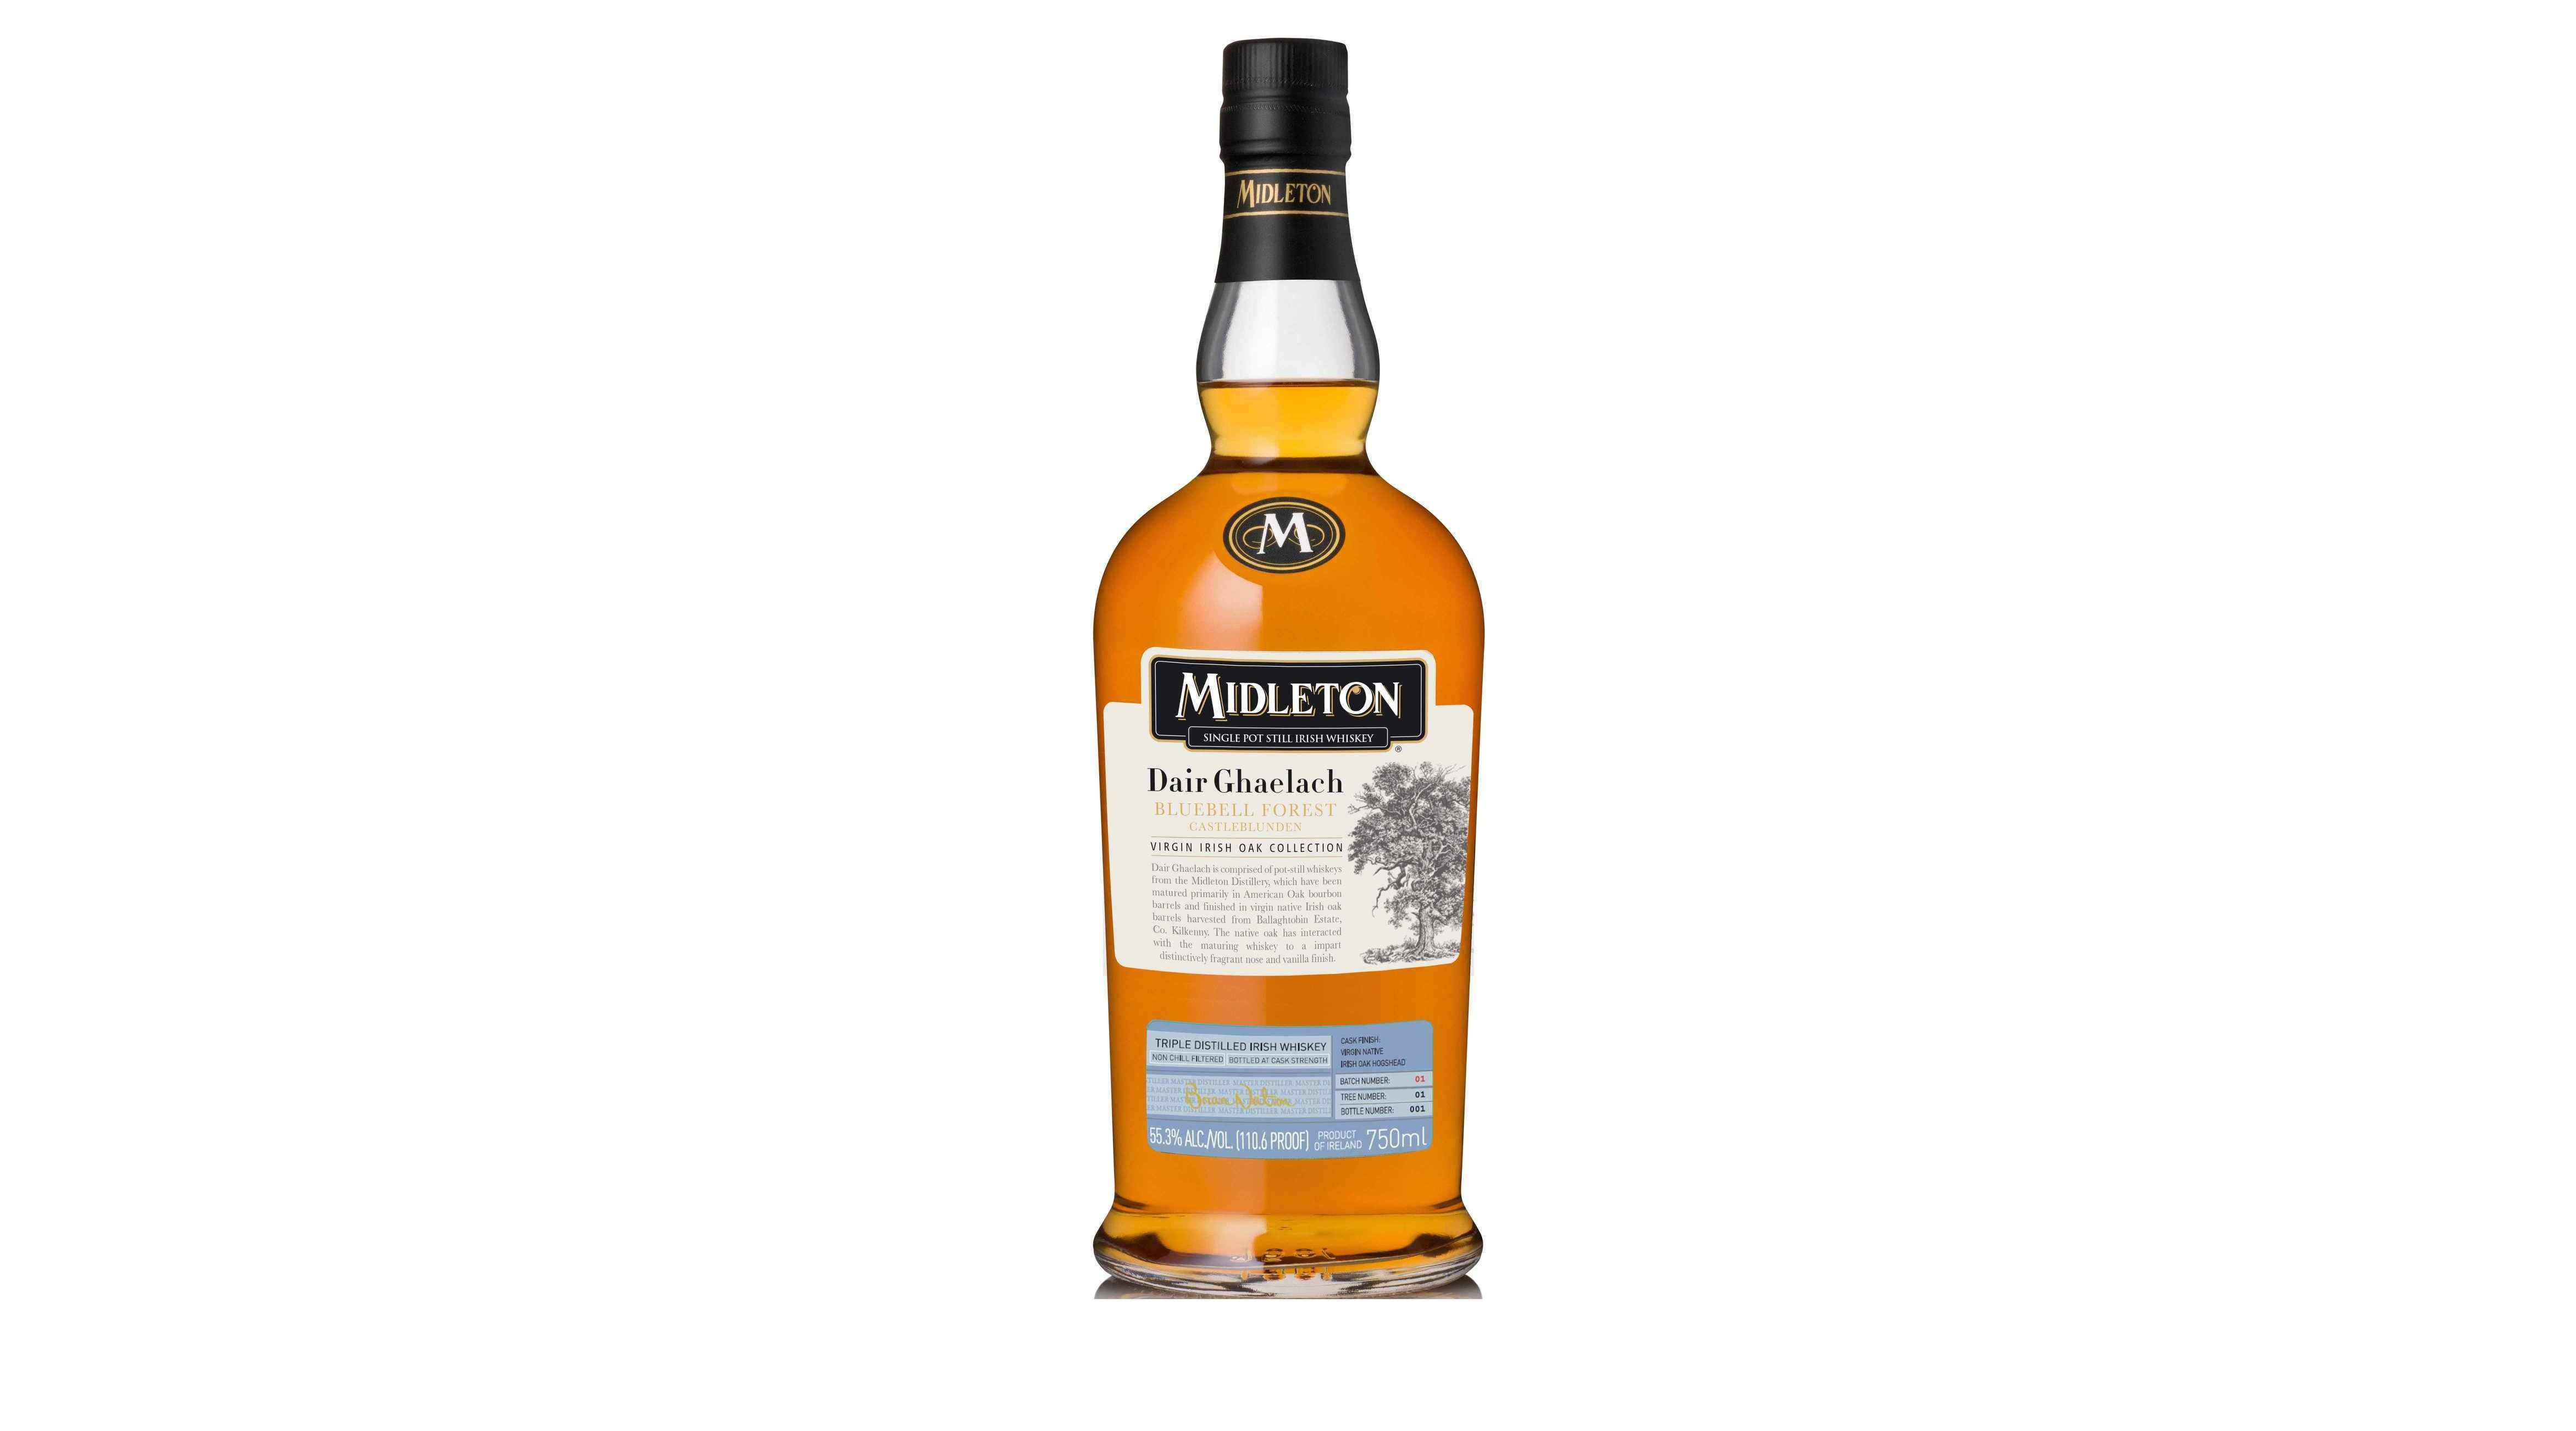 Midleton Dair Ghaelach Bluebell Forest (released last October) was highly commended, winning a Double Gold and a Gold medal.